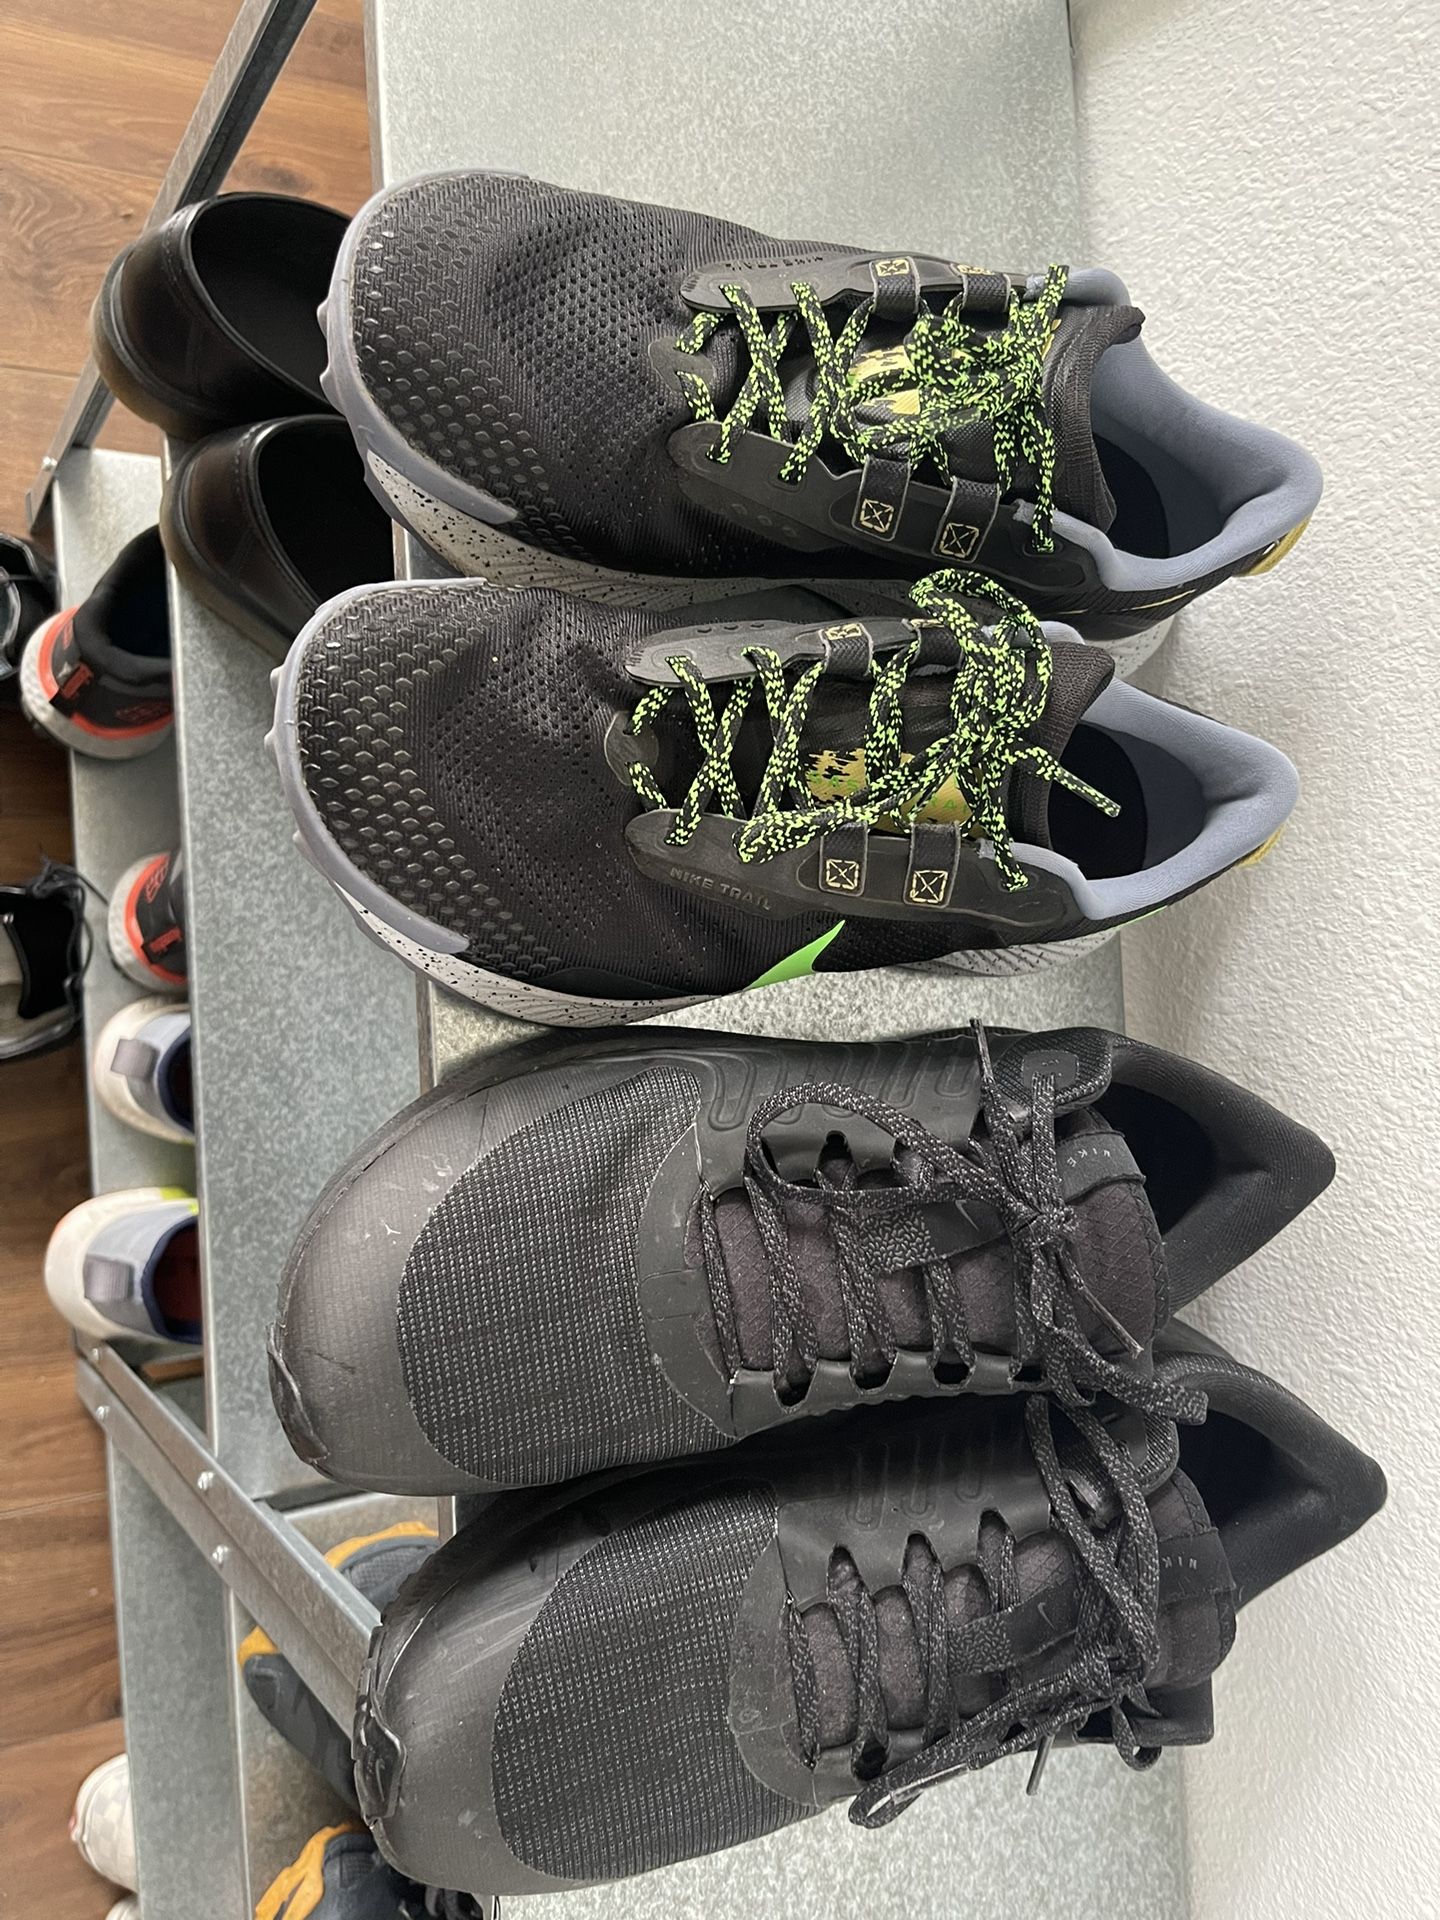 Nike Running Shoes 2 Pair For $50